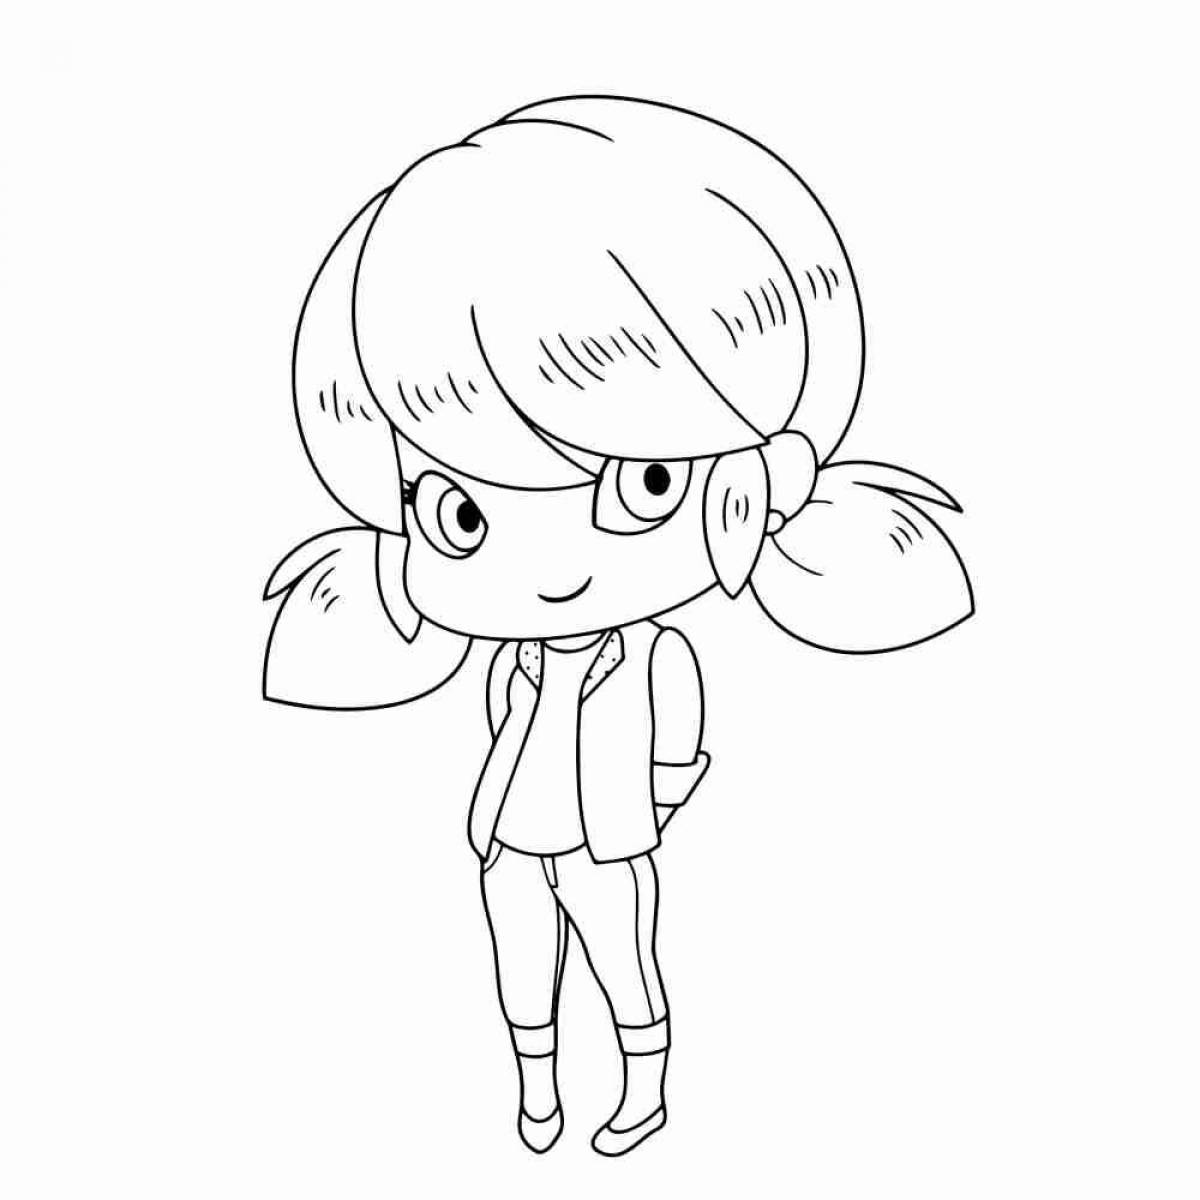 Coloring page charming marinette